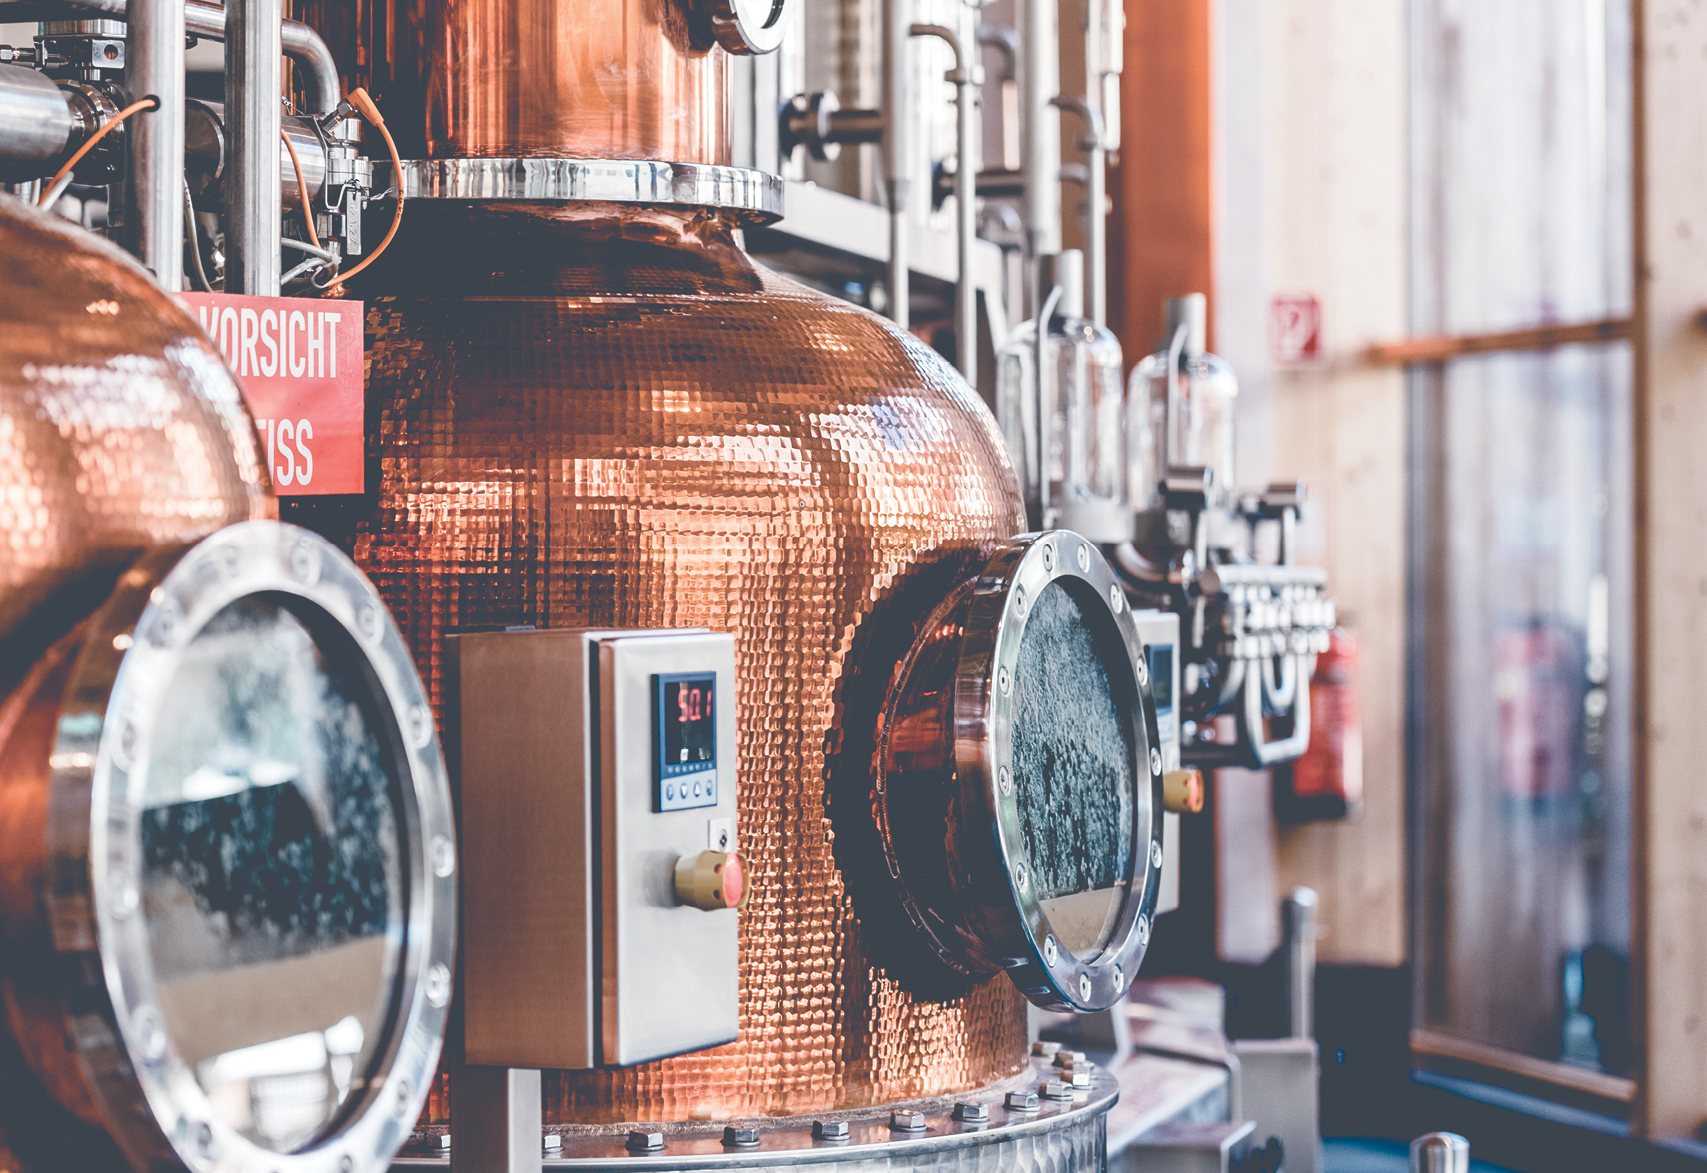 Whisky distillery factory equipment in copper color and blurred background